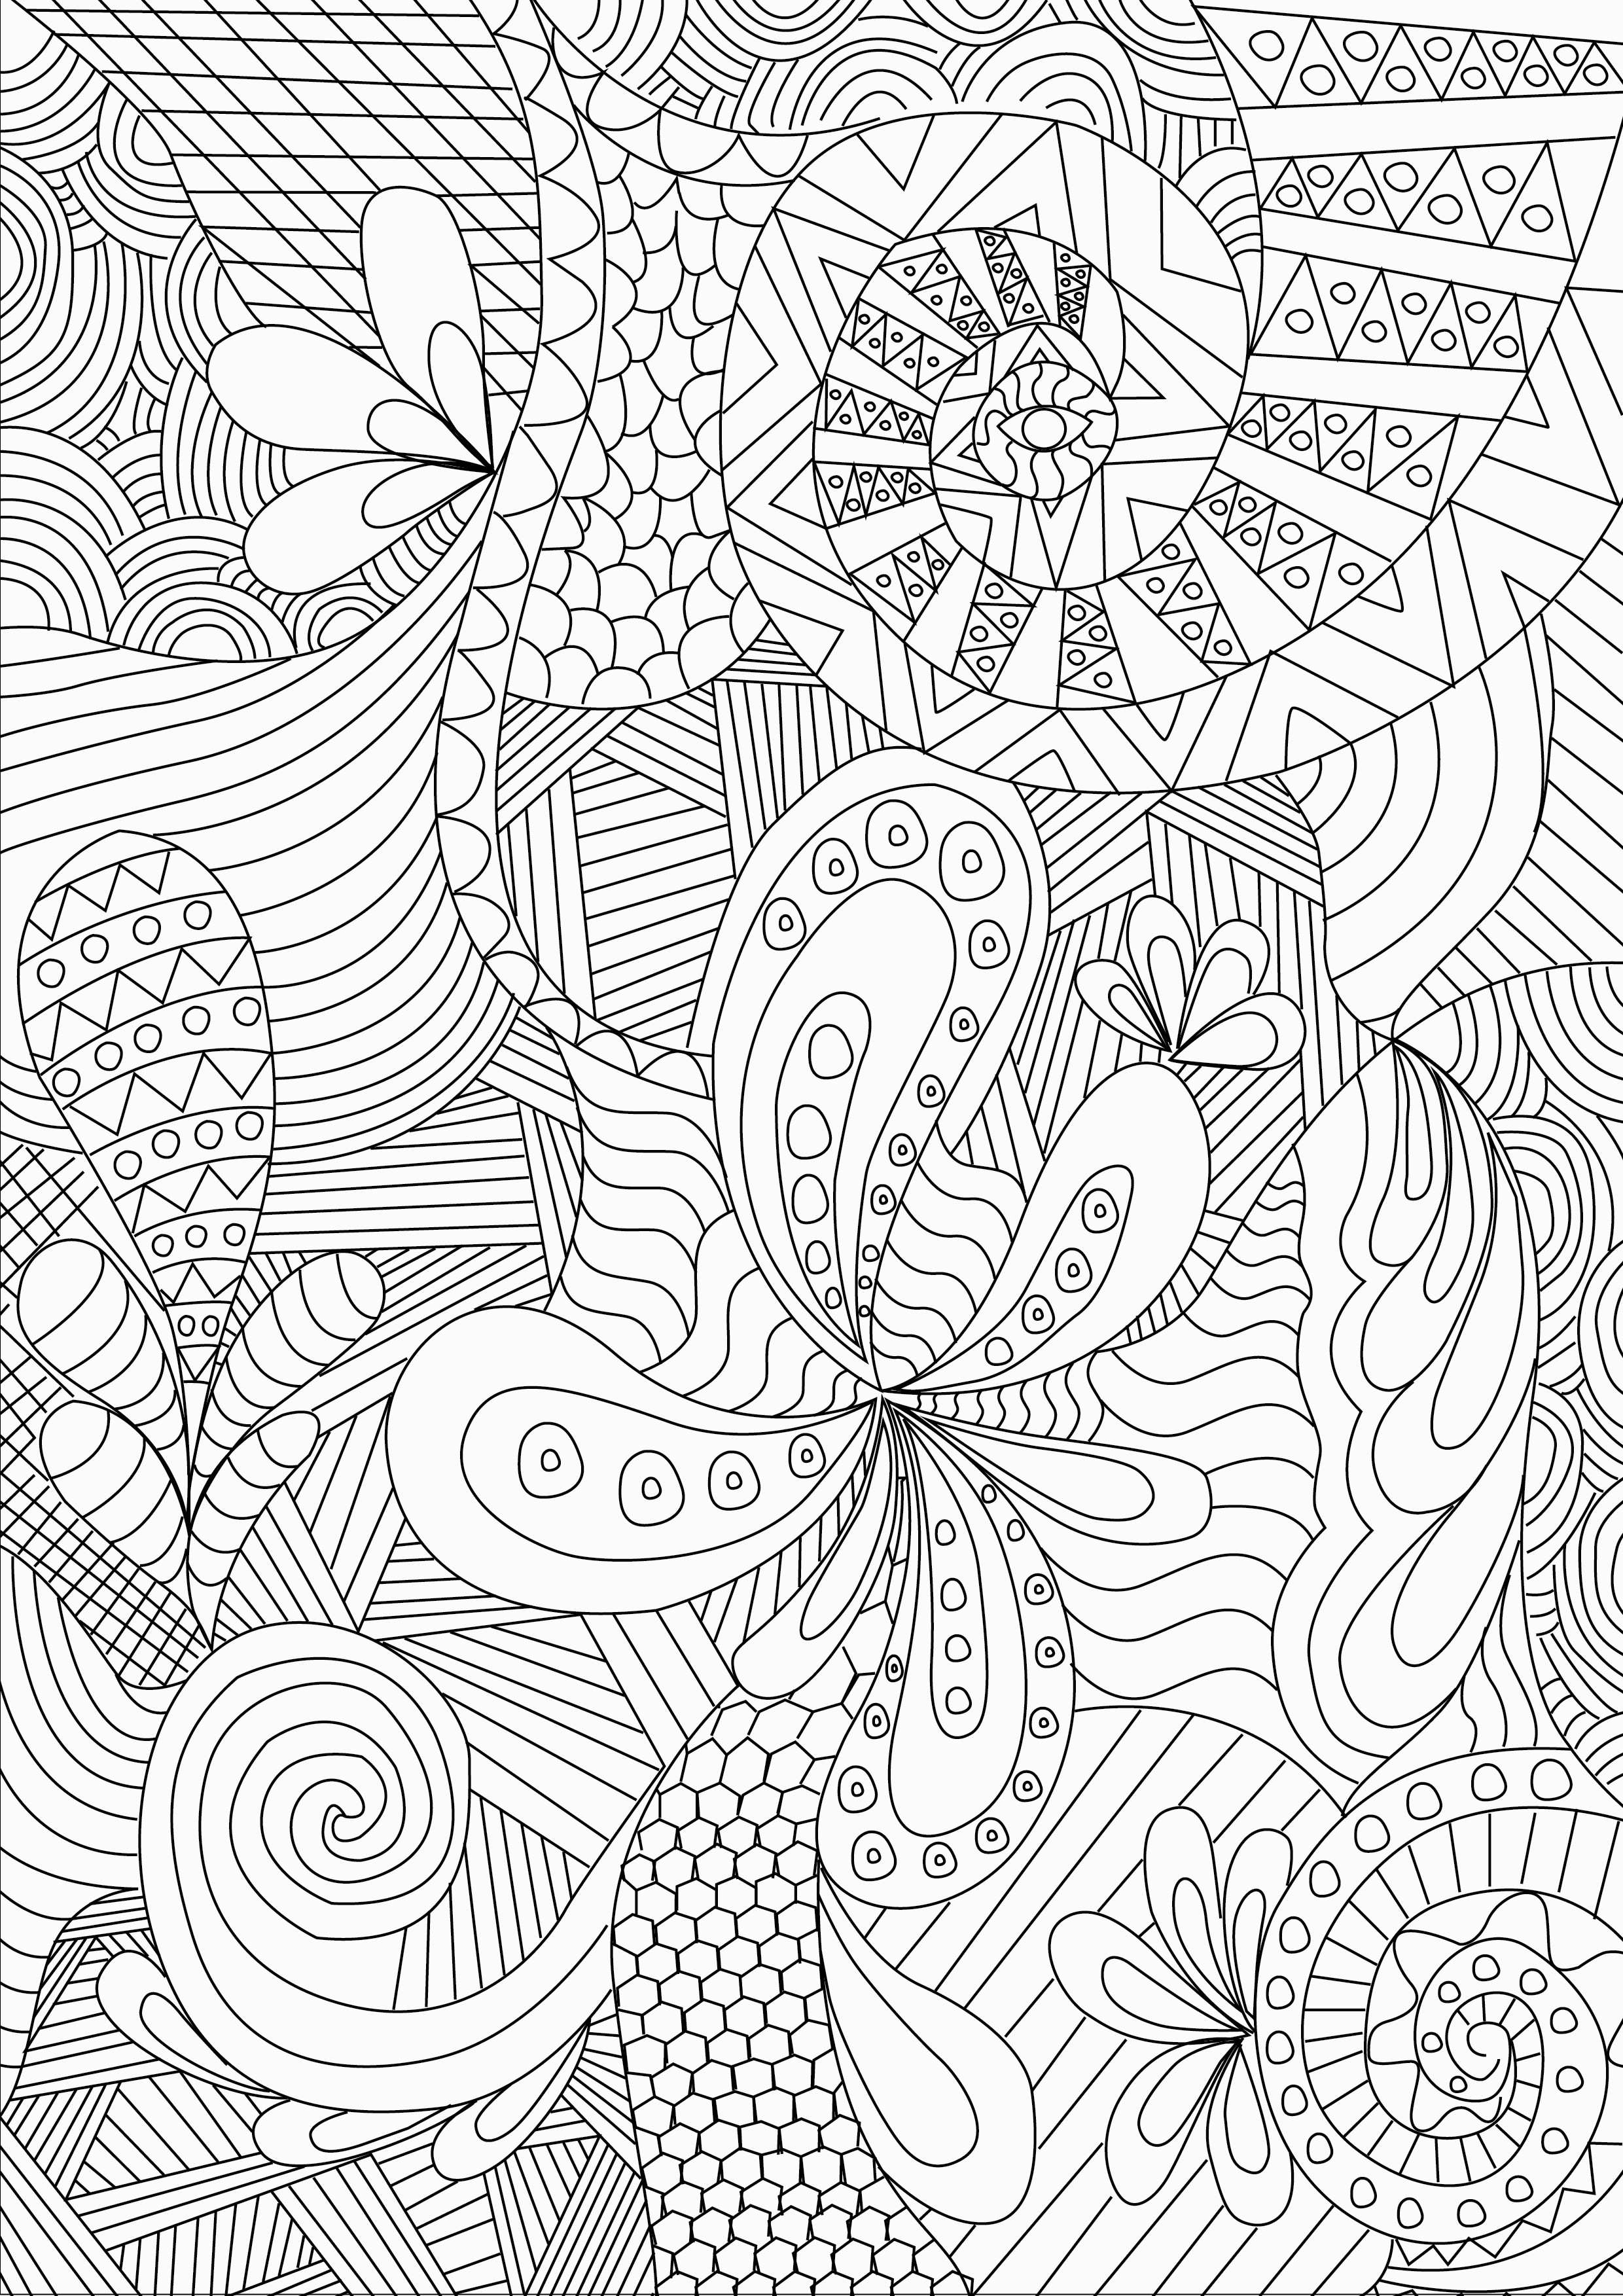 Adult Coloring Book Patterns
 Zentangle Colouring Pages In The Playroom